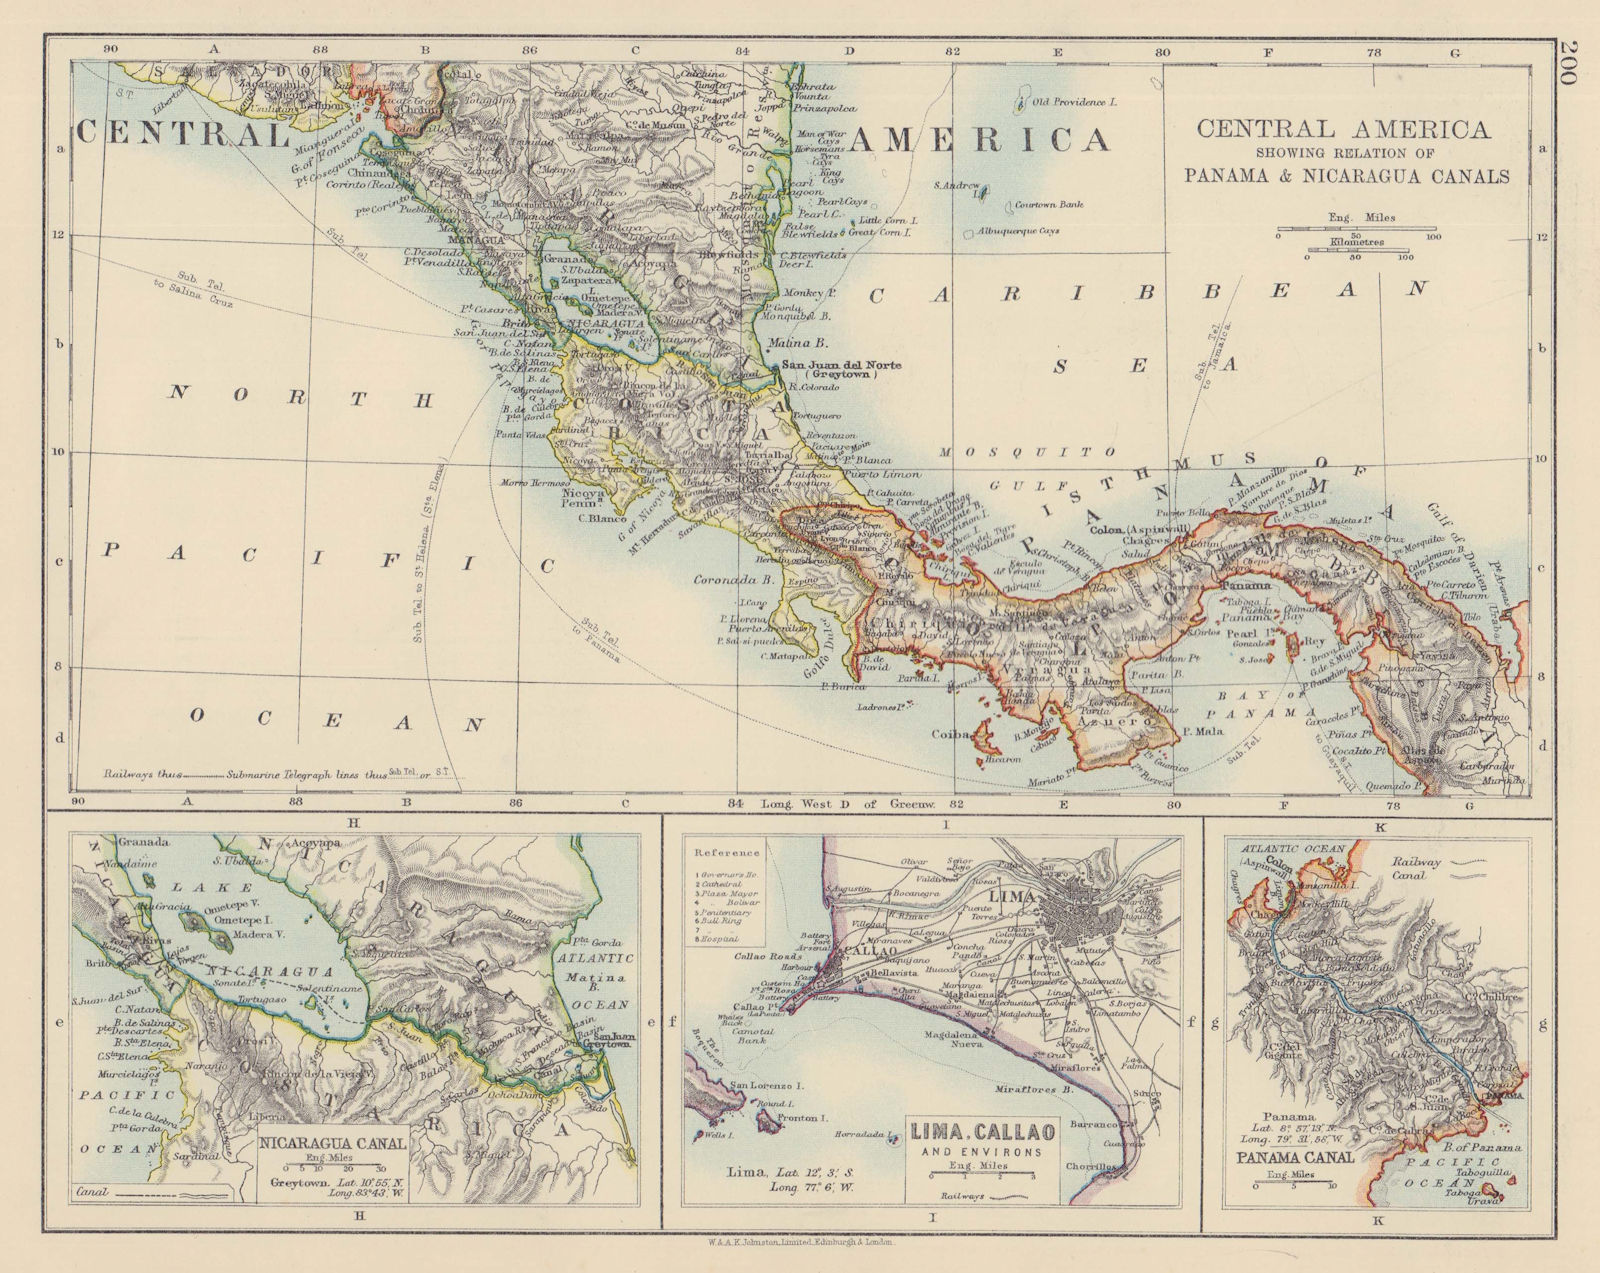 CENTRAL AMERICA. Panama & Nicaragua Canals. Lima Costa Rica. JOHNSTON 1901 map